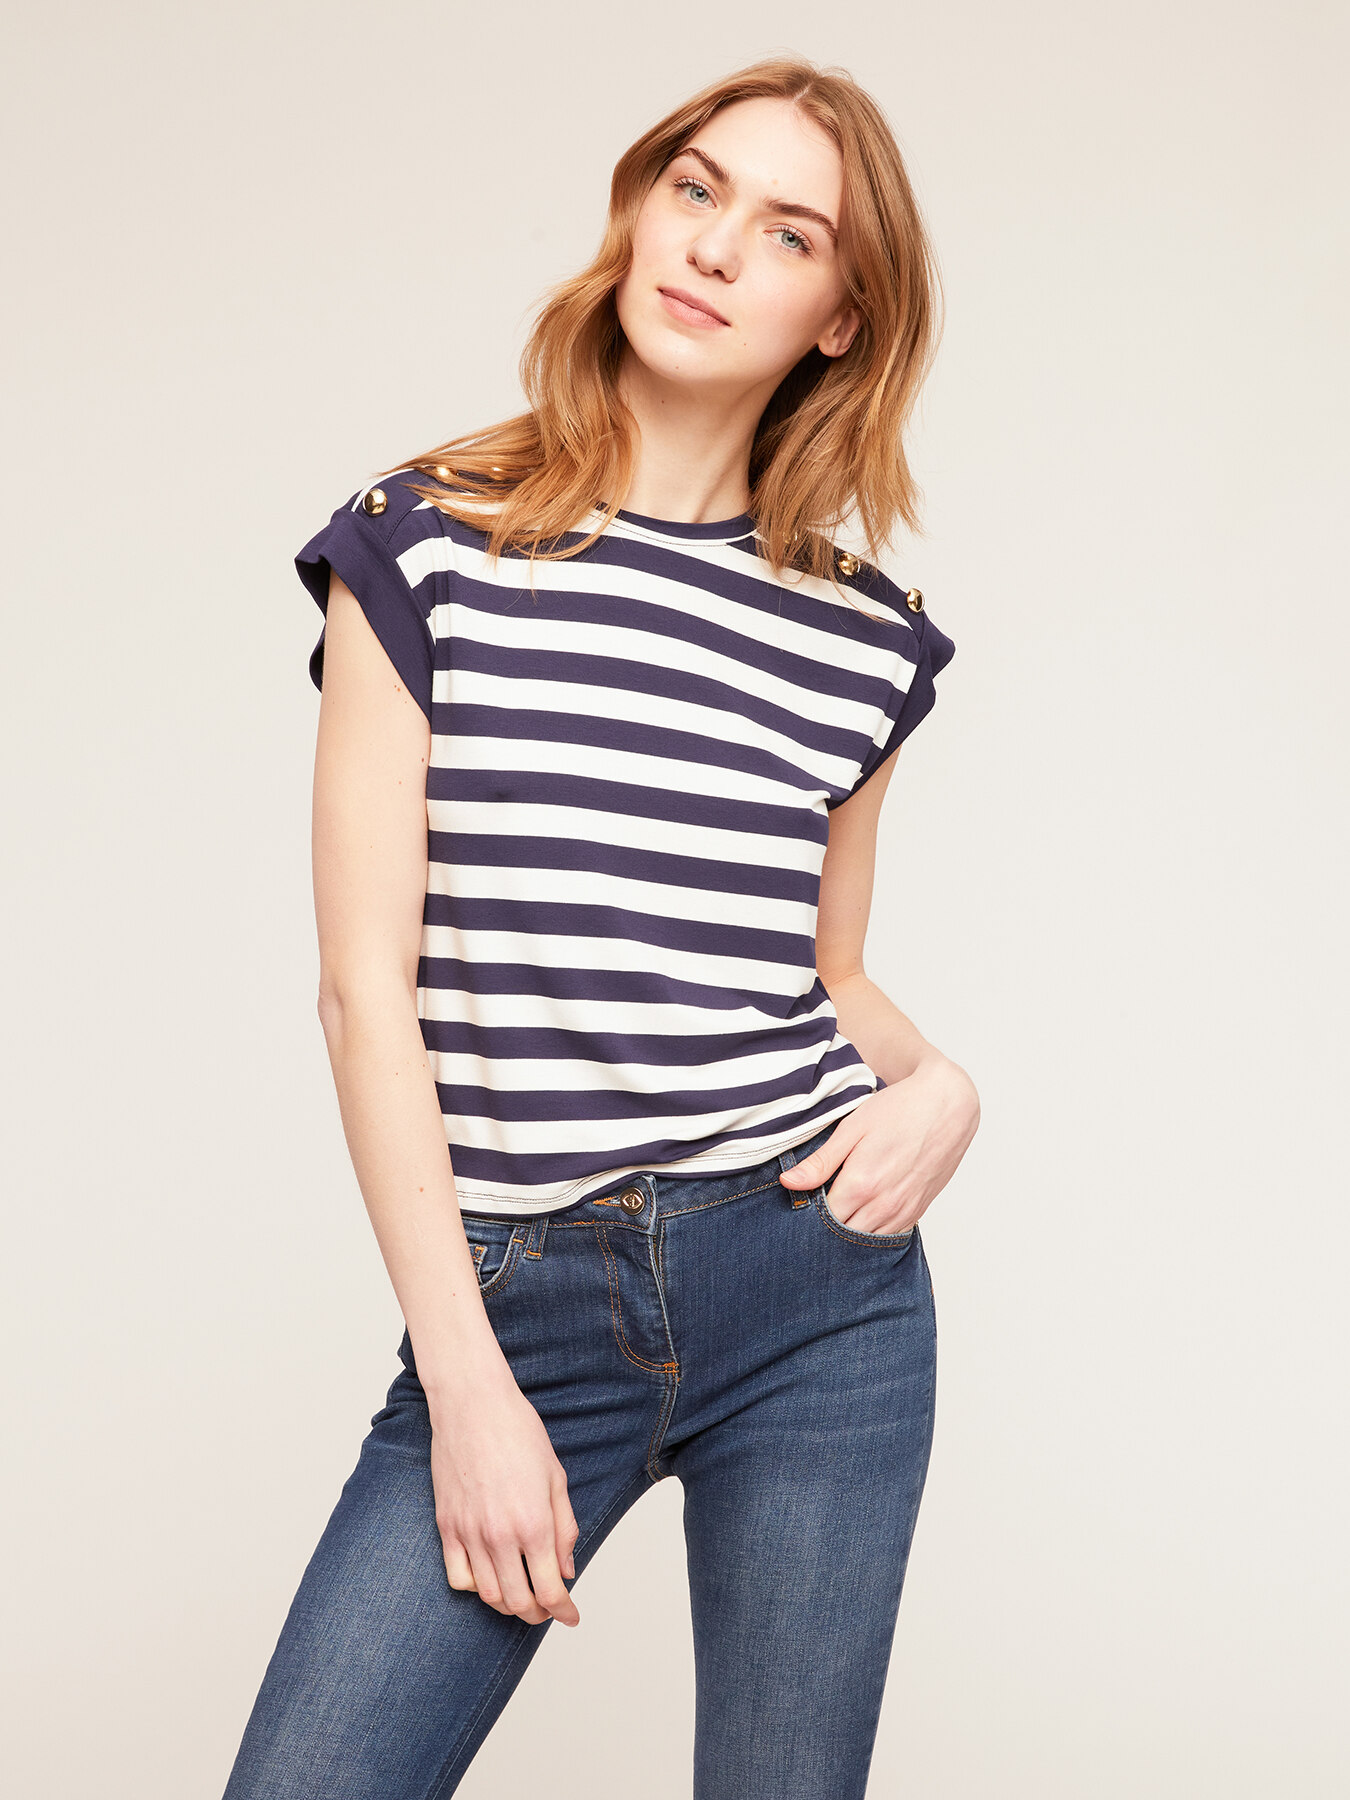 T-shirt navy a righe con motivo bottoni image number 0